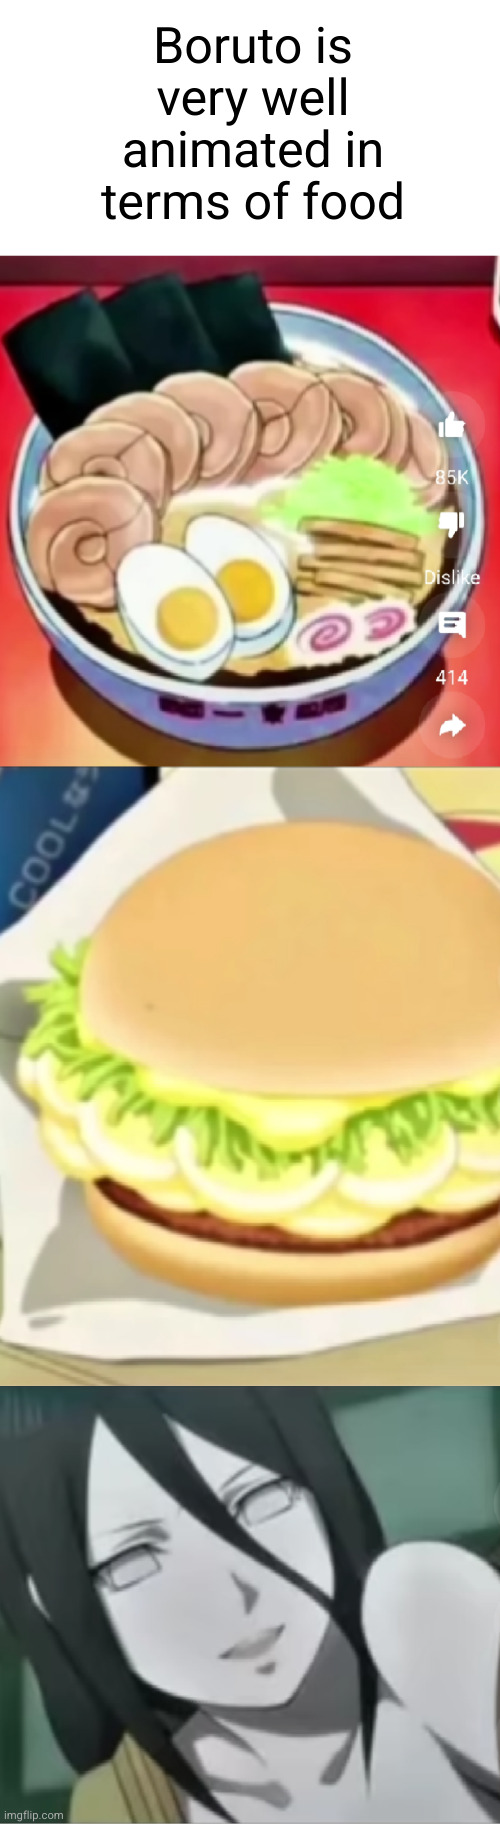 wait for it.... OH SHIII- | Boruto is very well animated in terms of food | image tagged in boruto,food,delicious,sexy women,anime,oh shi- | made w/ Imgflip meme maker